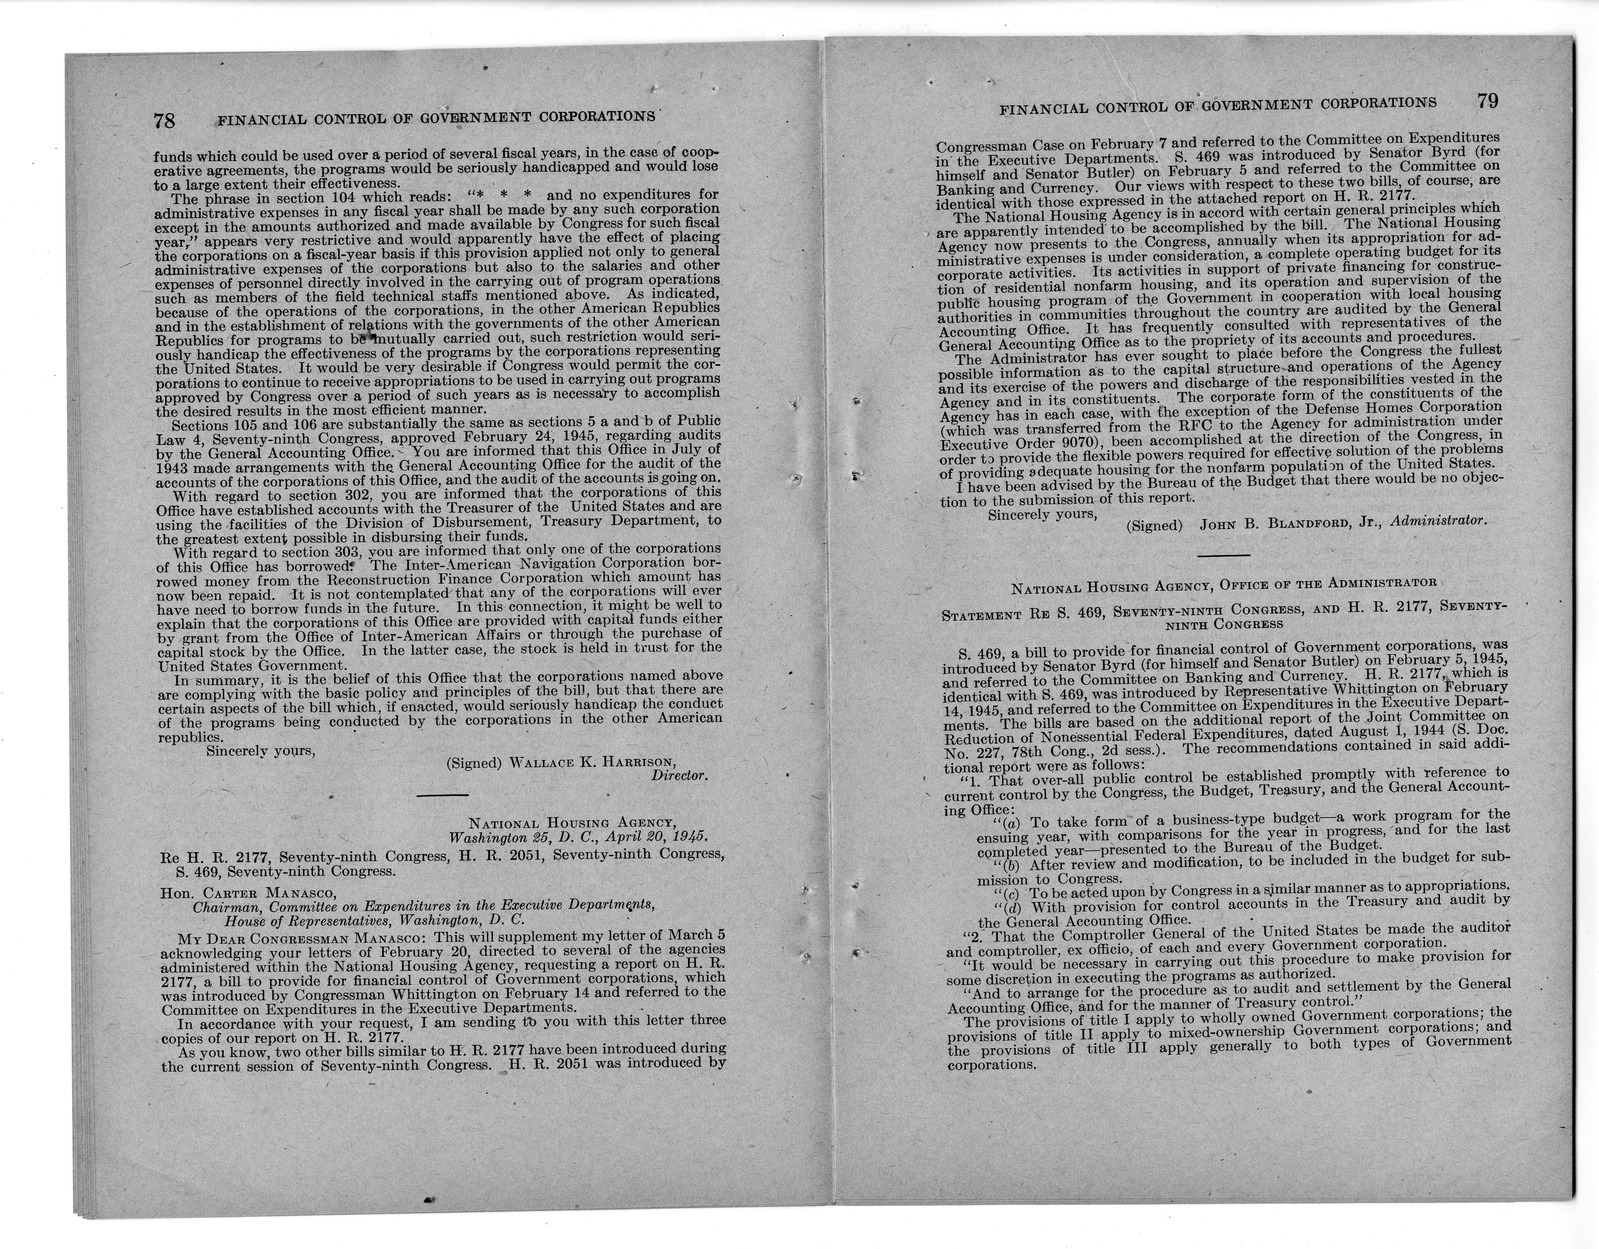 Memorandum from Paul H. Appleby to M. C. Latta, H.R. 3660, To Provide for Financial Control of Government Corporations, with Attachments